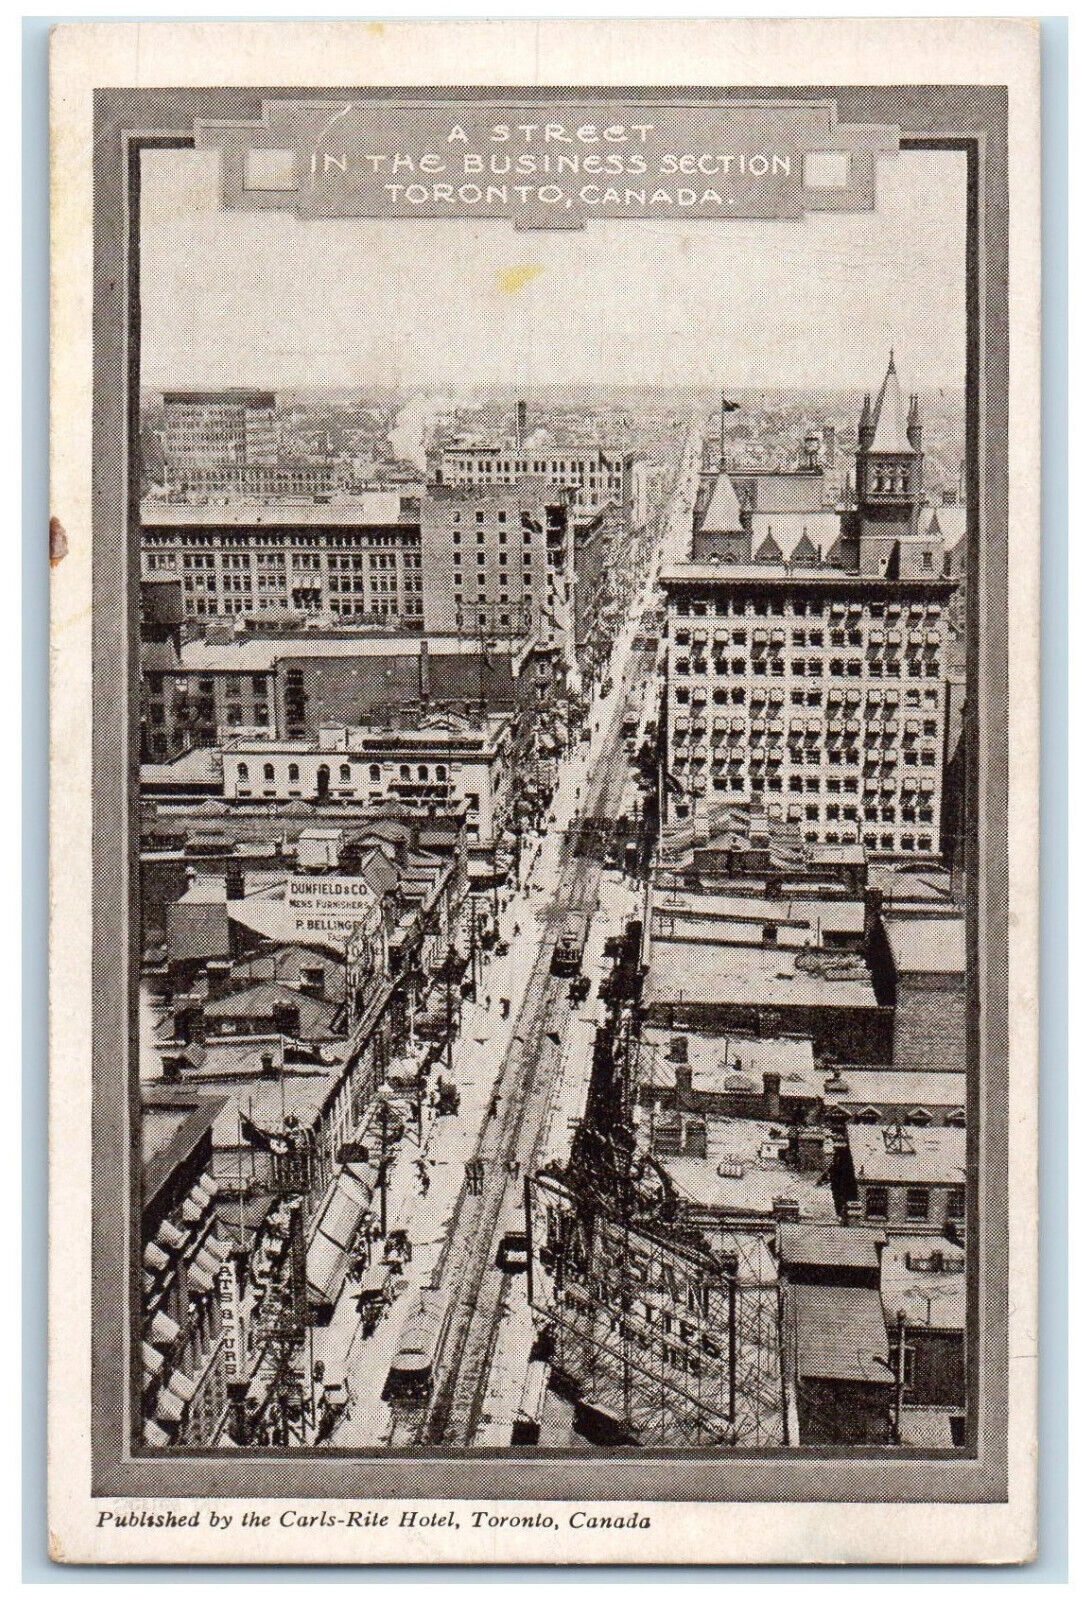 c1930's A Street In The Business Section Toronto Ontario Canada Postcard